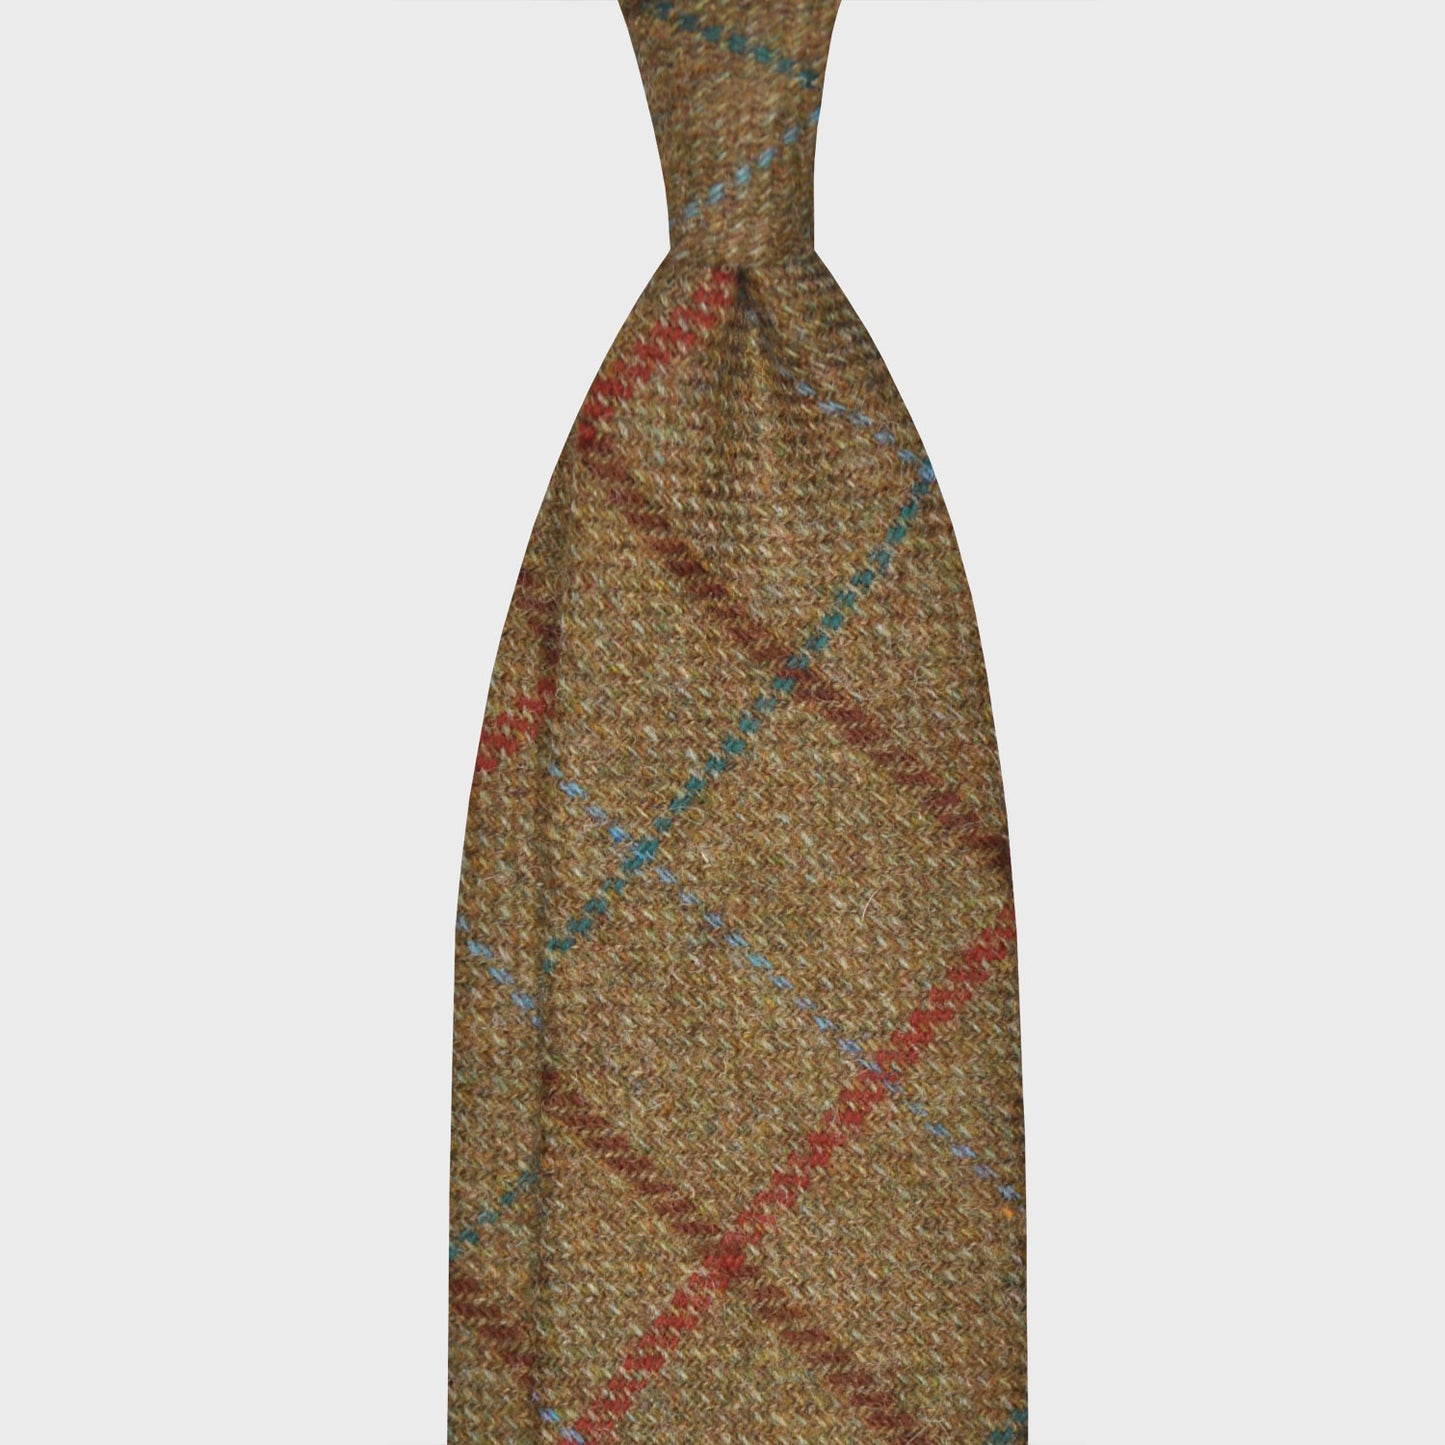 Clay Brown Tweed Tie Windowpane Multicolor. Timeless tweed tie, wool texture to the touch bristly feeling, unlined tie handmade in Italy by F.Marino Napoli exclusive for Wools Boutique Uomo, clay brown background, multicolor windowpane pattern